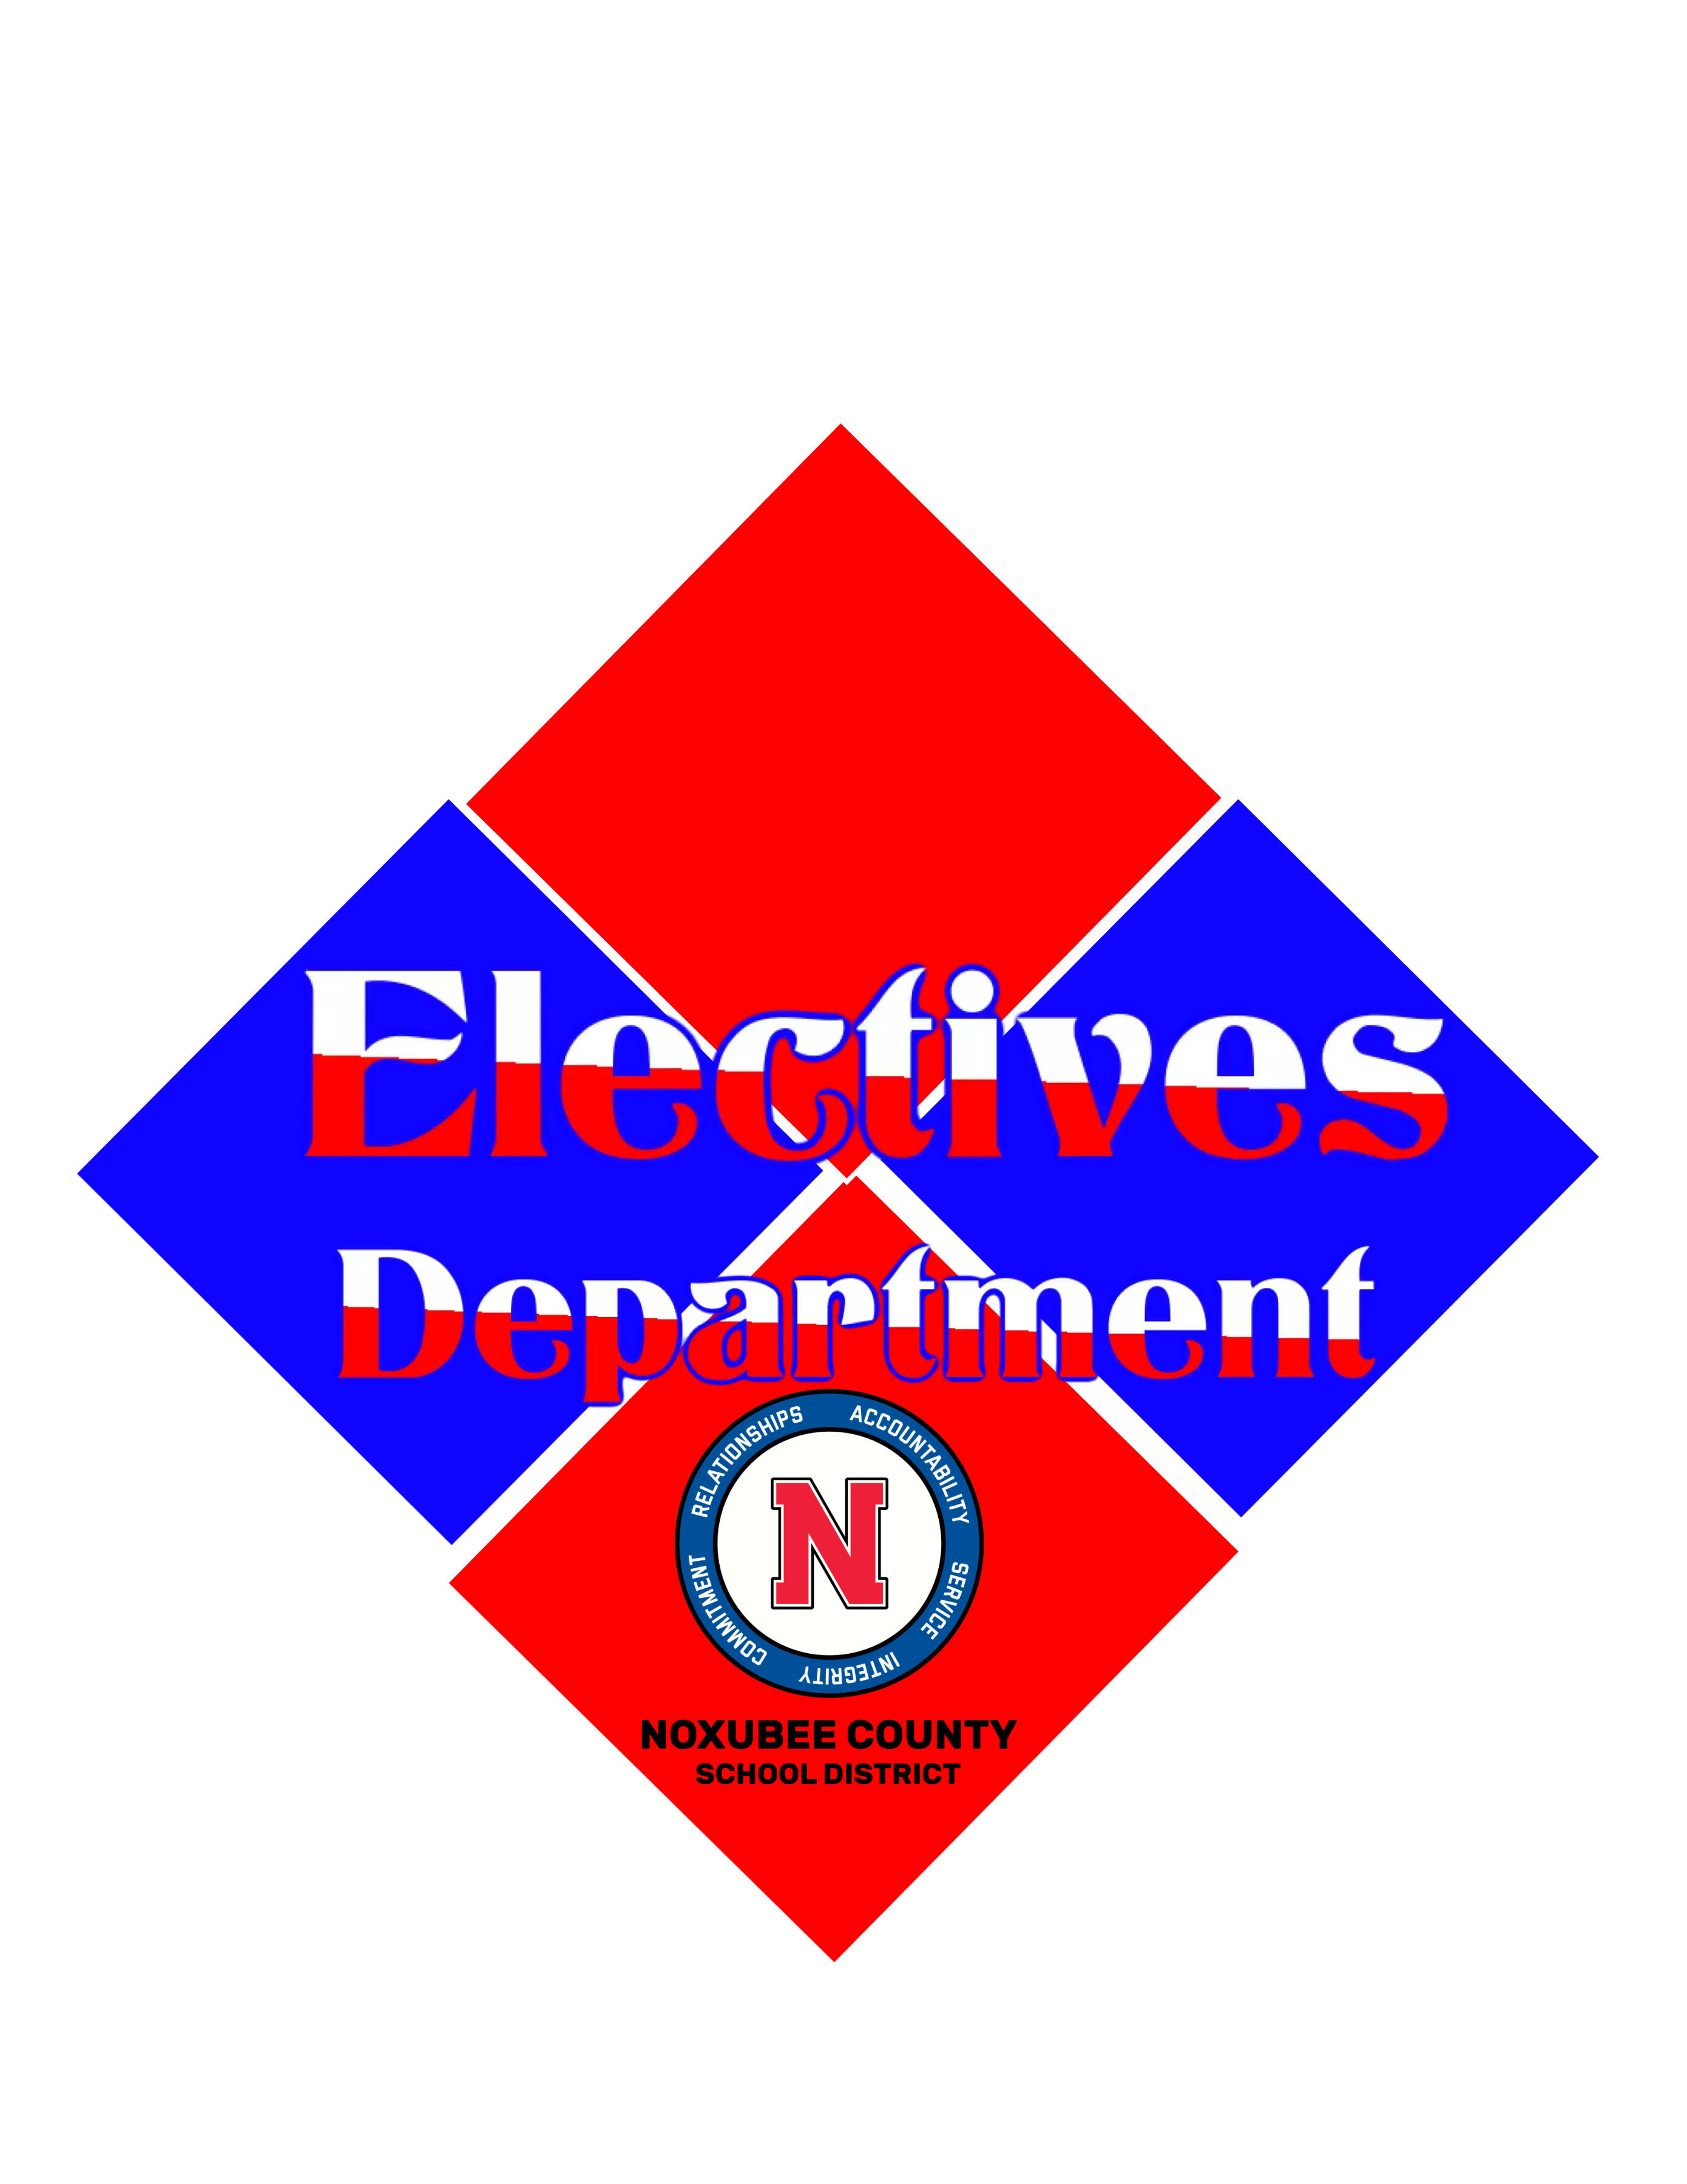 Electives department